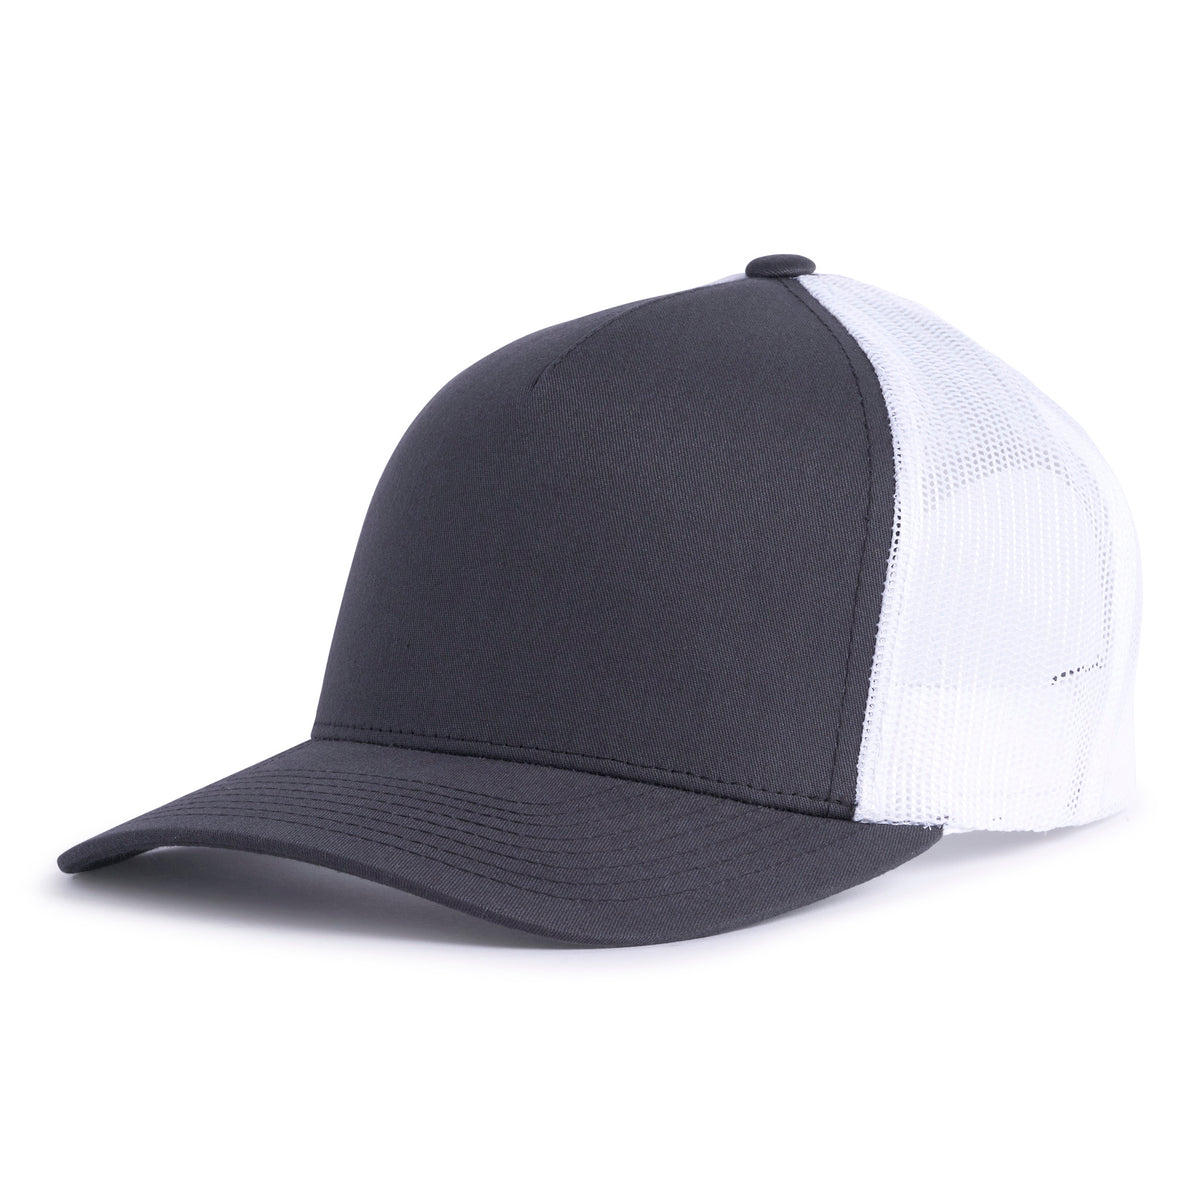 Charcoal grey trucker hat with a curved bill, 5-panels, structured mid-high crown, white mesh back, and a snapback closure from Tailgate Hats.